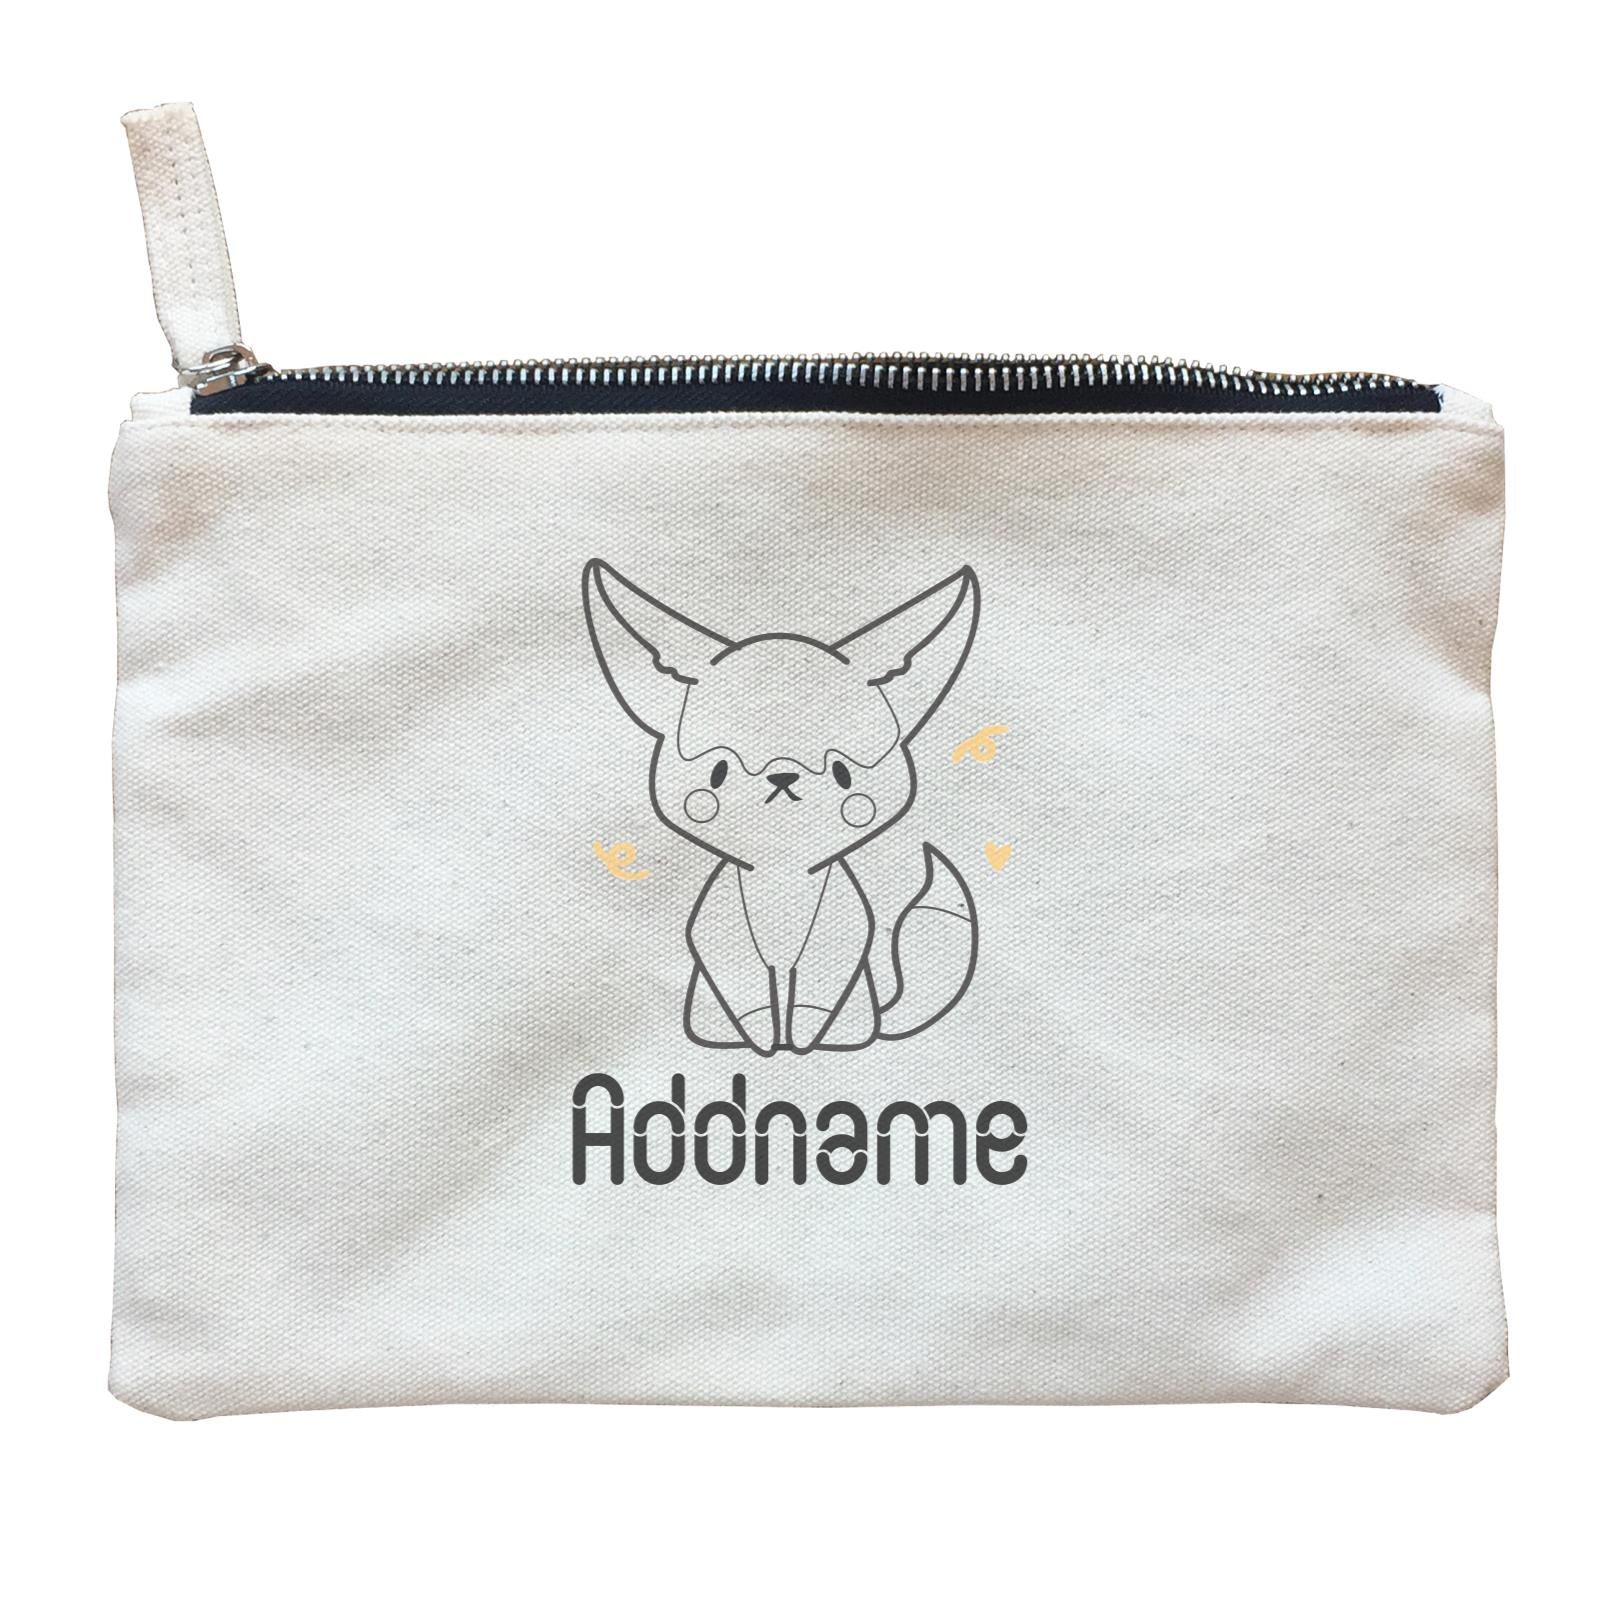 Coloring Outline Cute Hand Drawn Animals Fox Fennec Fox Addname Zipper Pouch